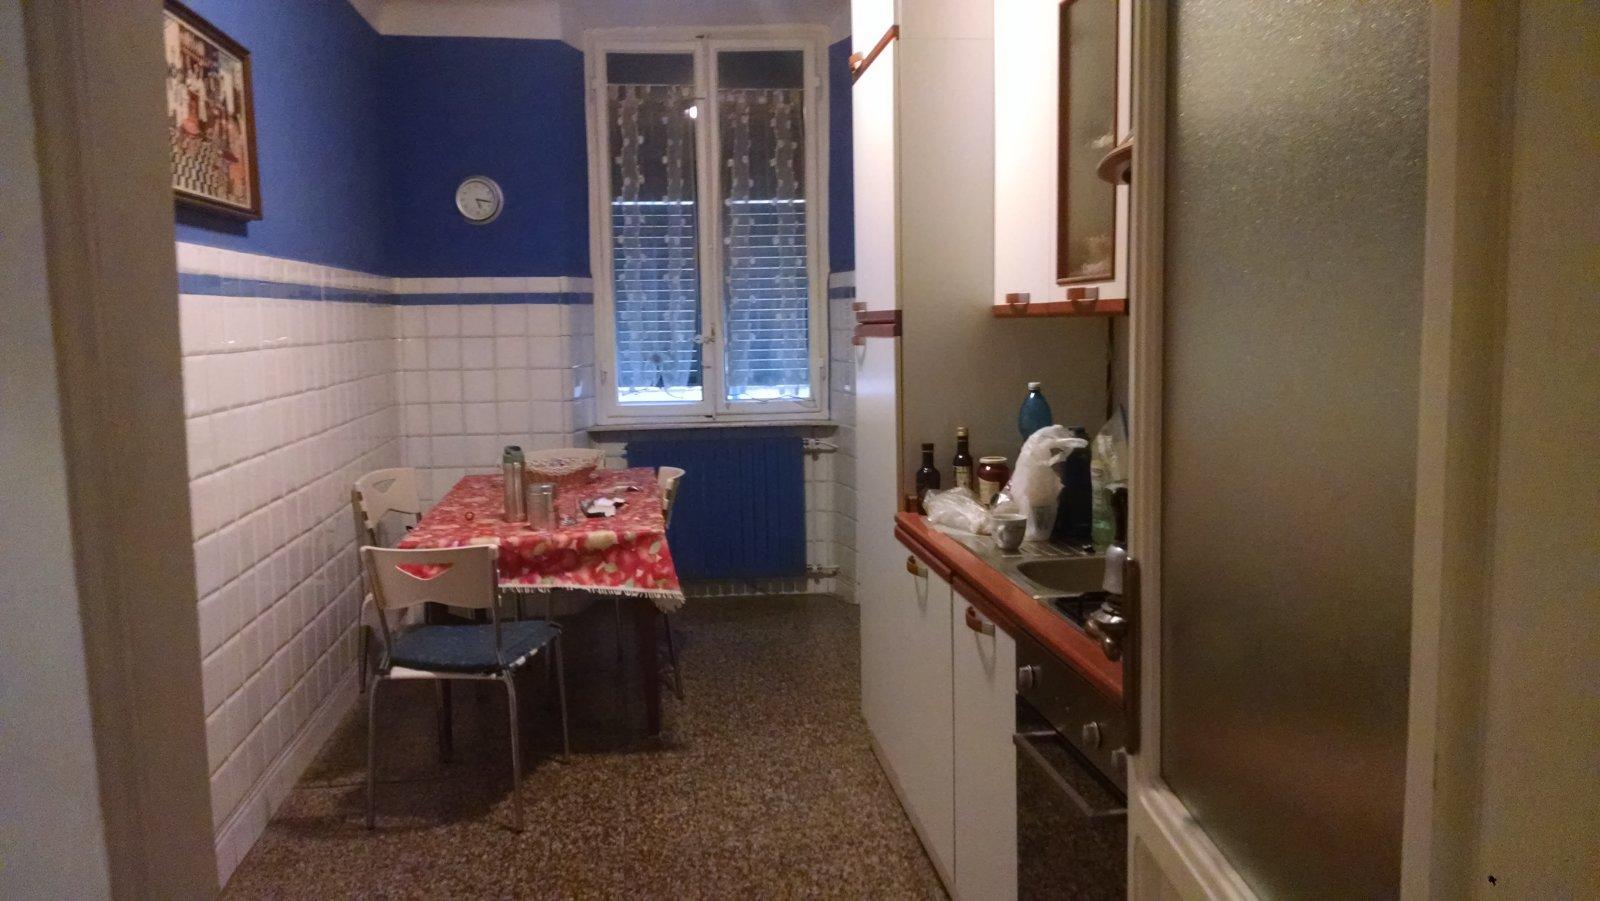 The kitchen, which was its own room, with a door to close it off.